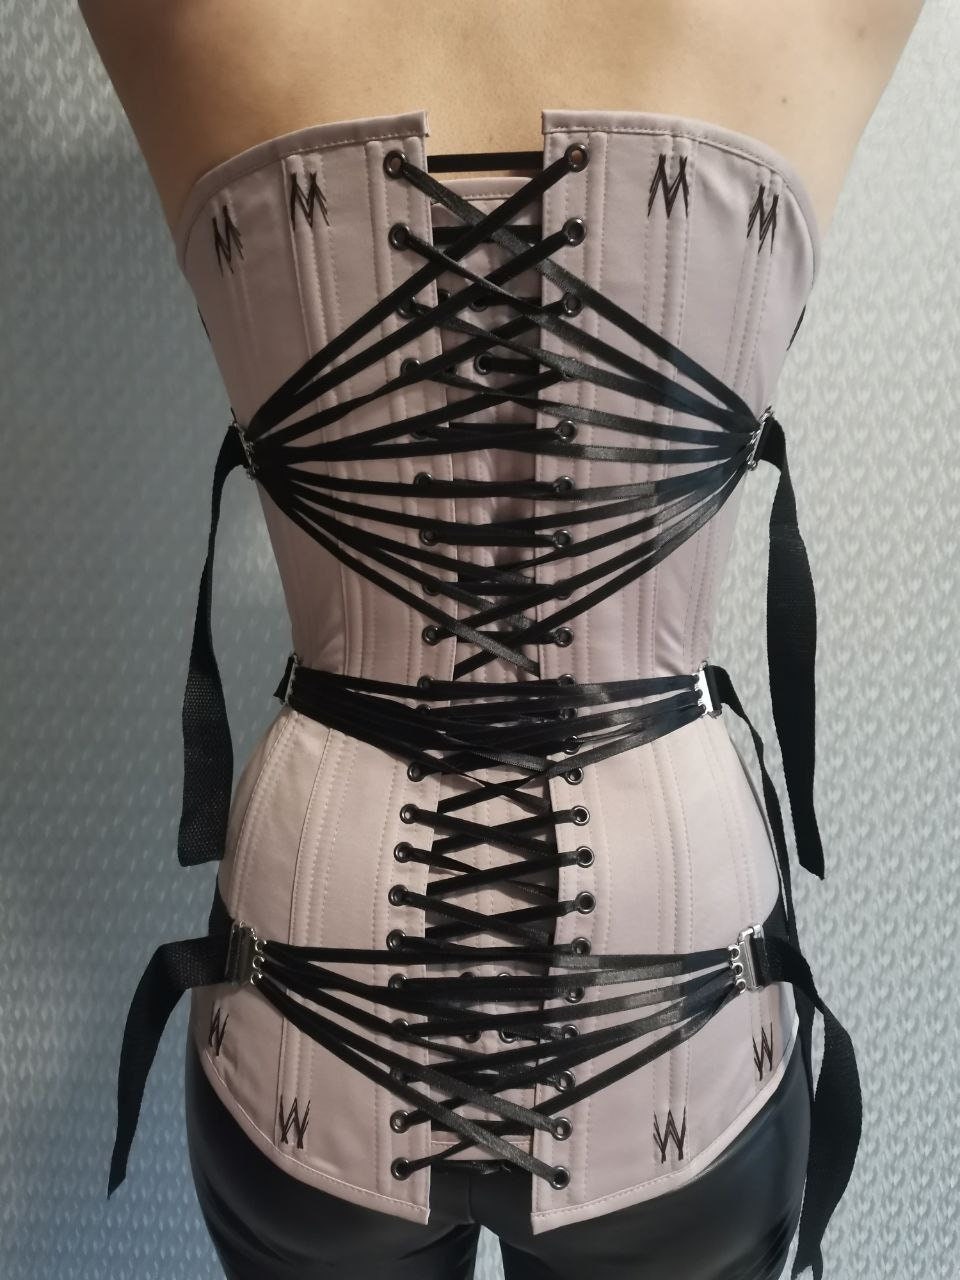 OVERBUST CORSETS: Pros & Cons